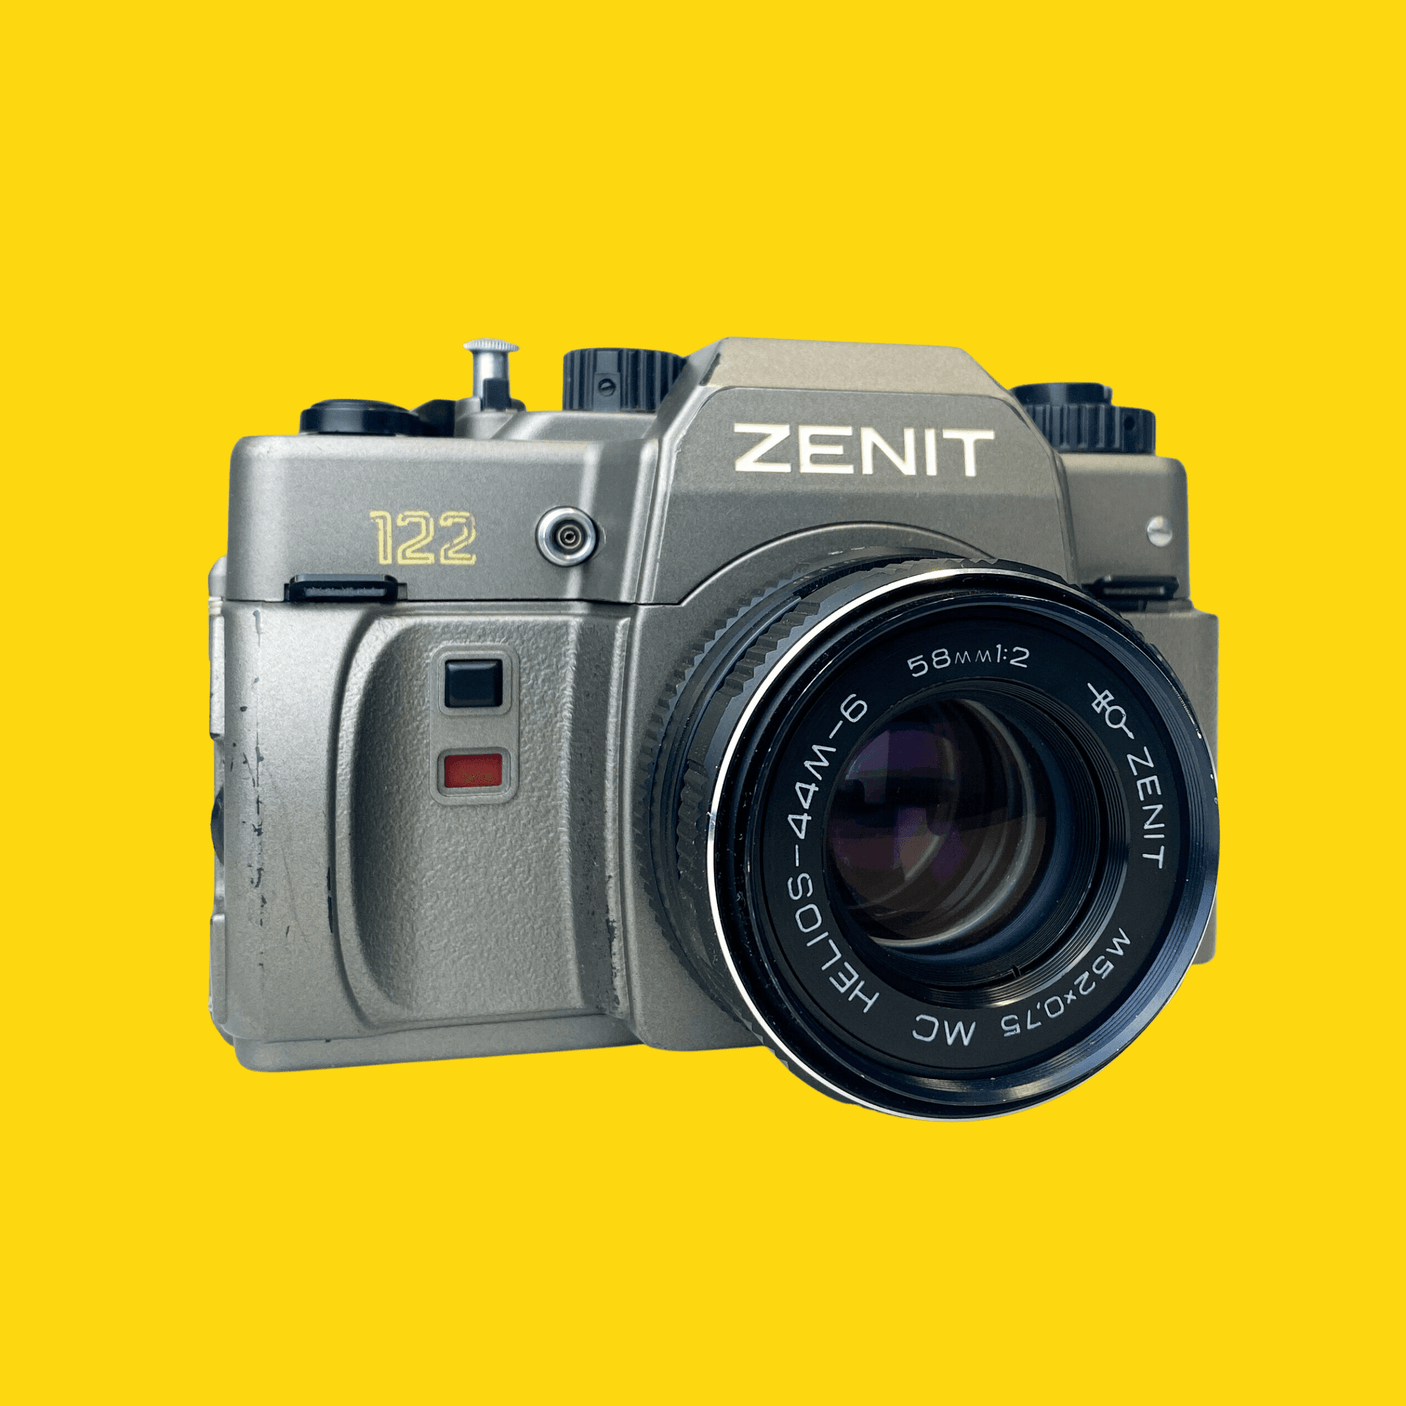 Zenit-122 50th Anniversary KMZ Special Edition 35mm Film Camera With 58mm Helios F1.8 Lens.